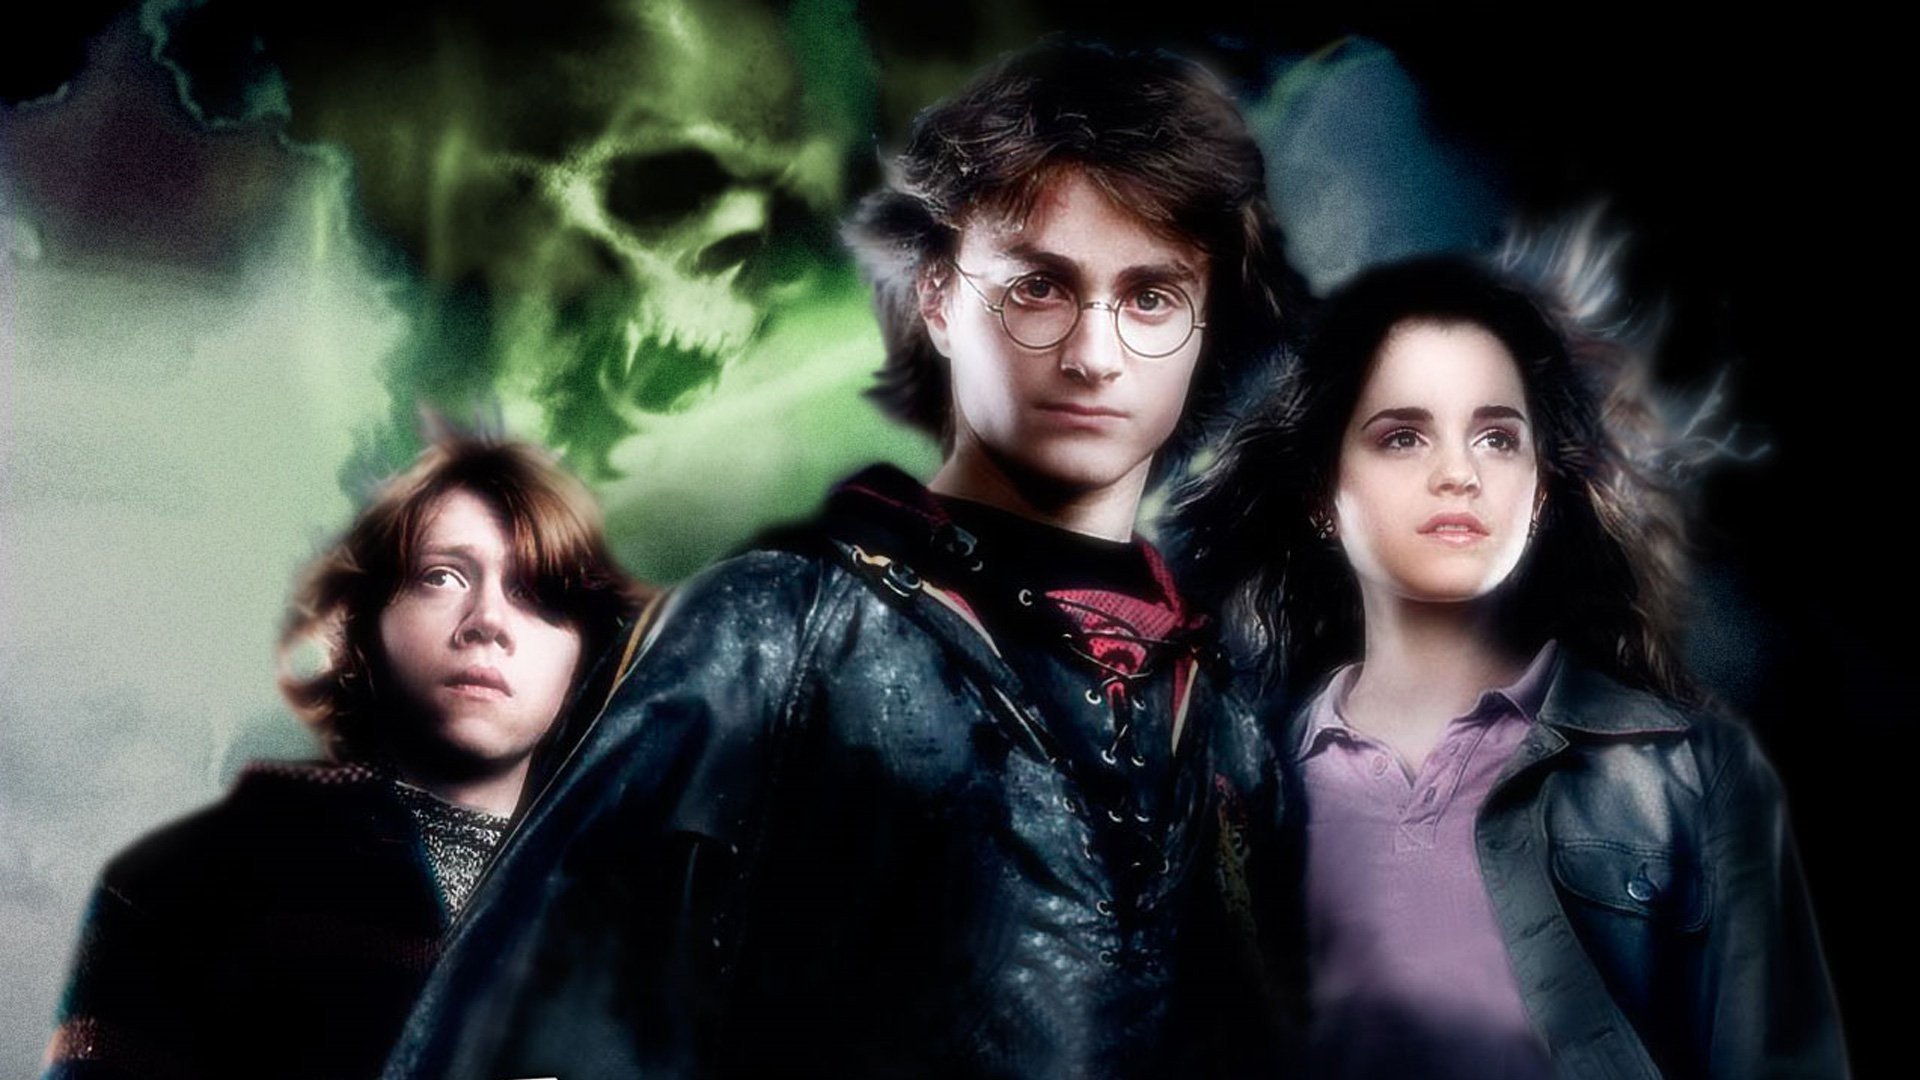 harry potter and the goblet of fire online free 123movies